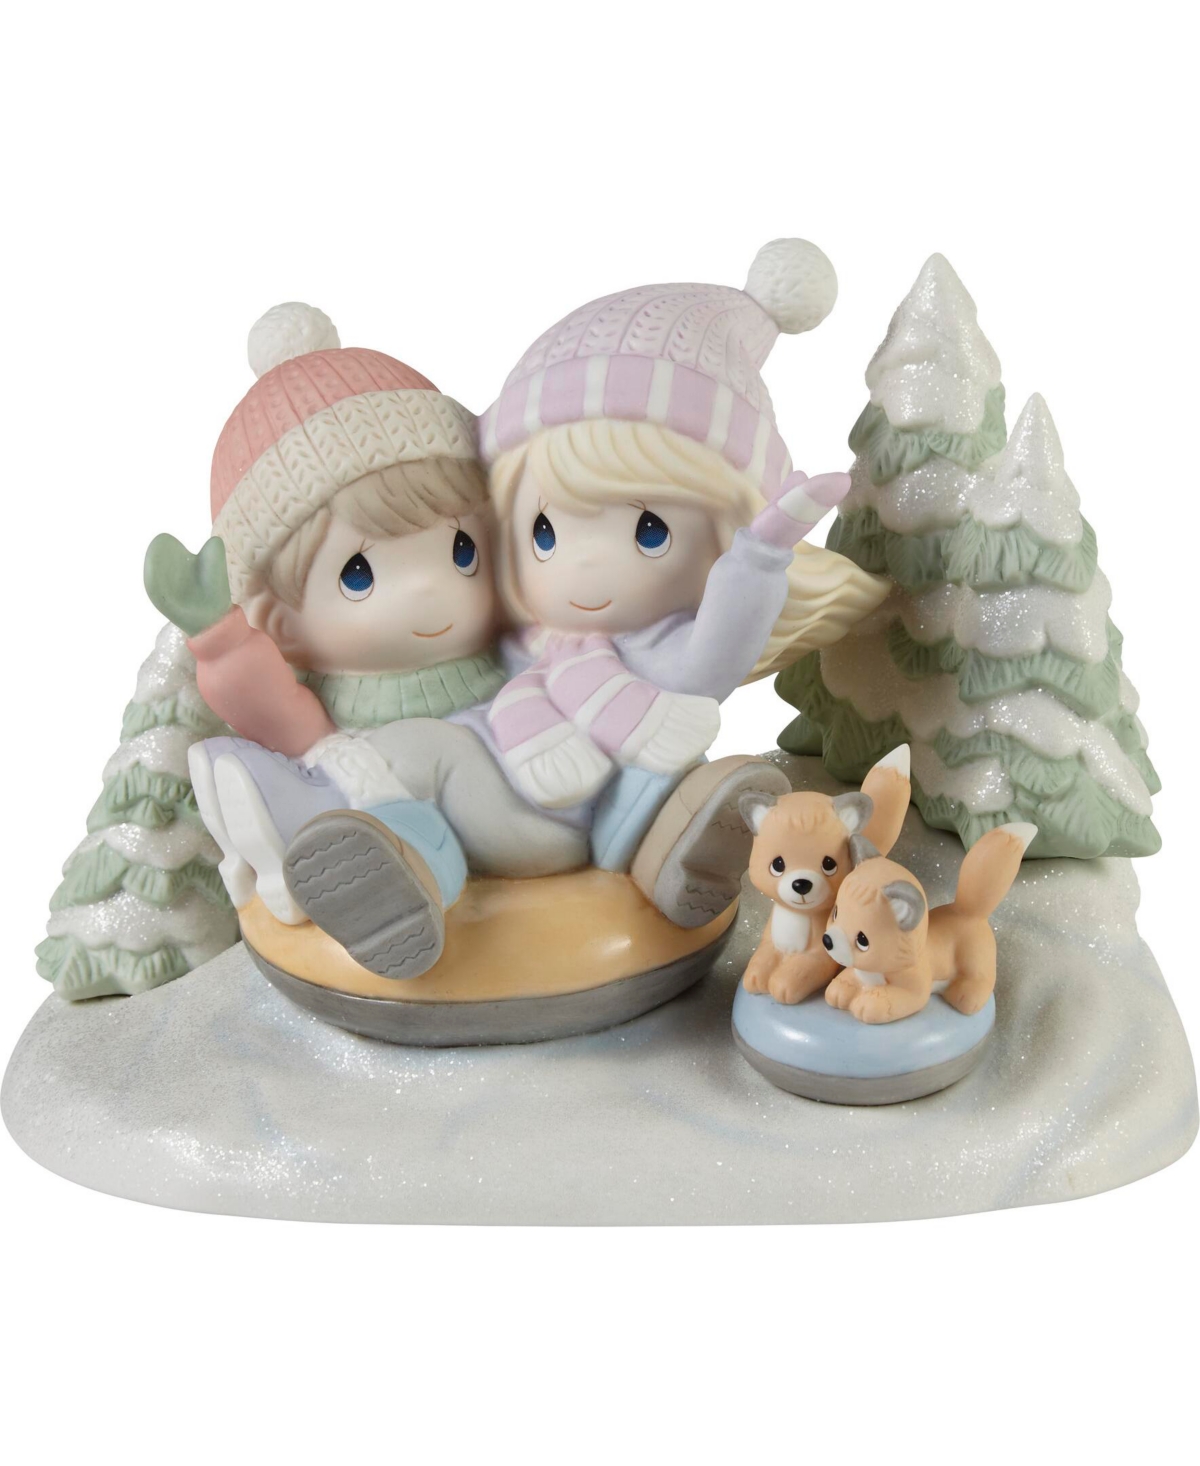 Precious Moments Away We Go In The Snow Limited Edition Bisque Porcelain Figurine In Multicolored